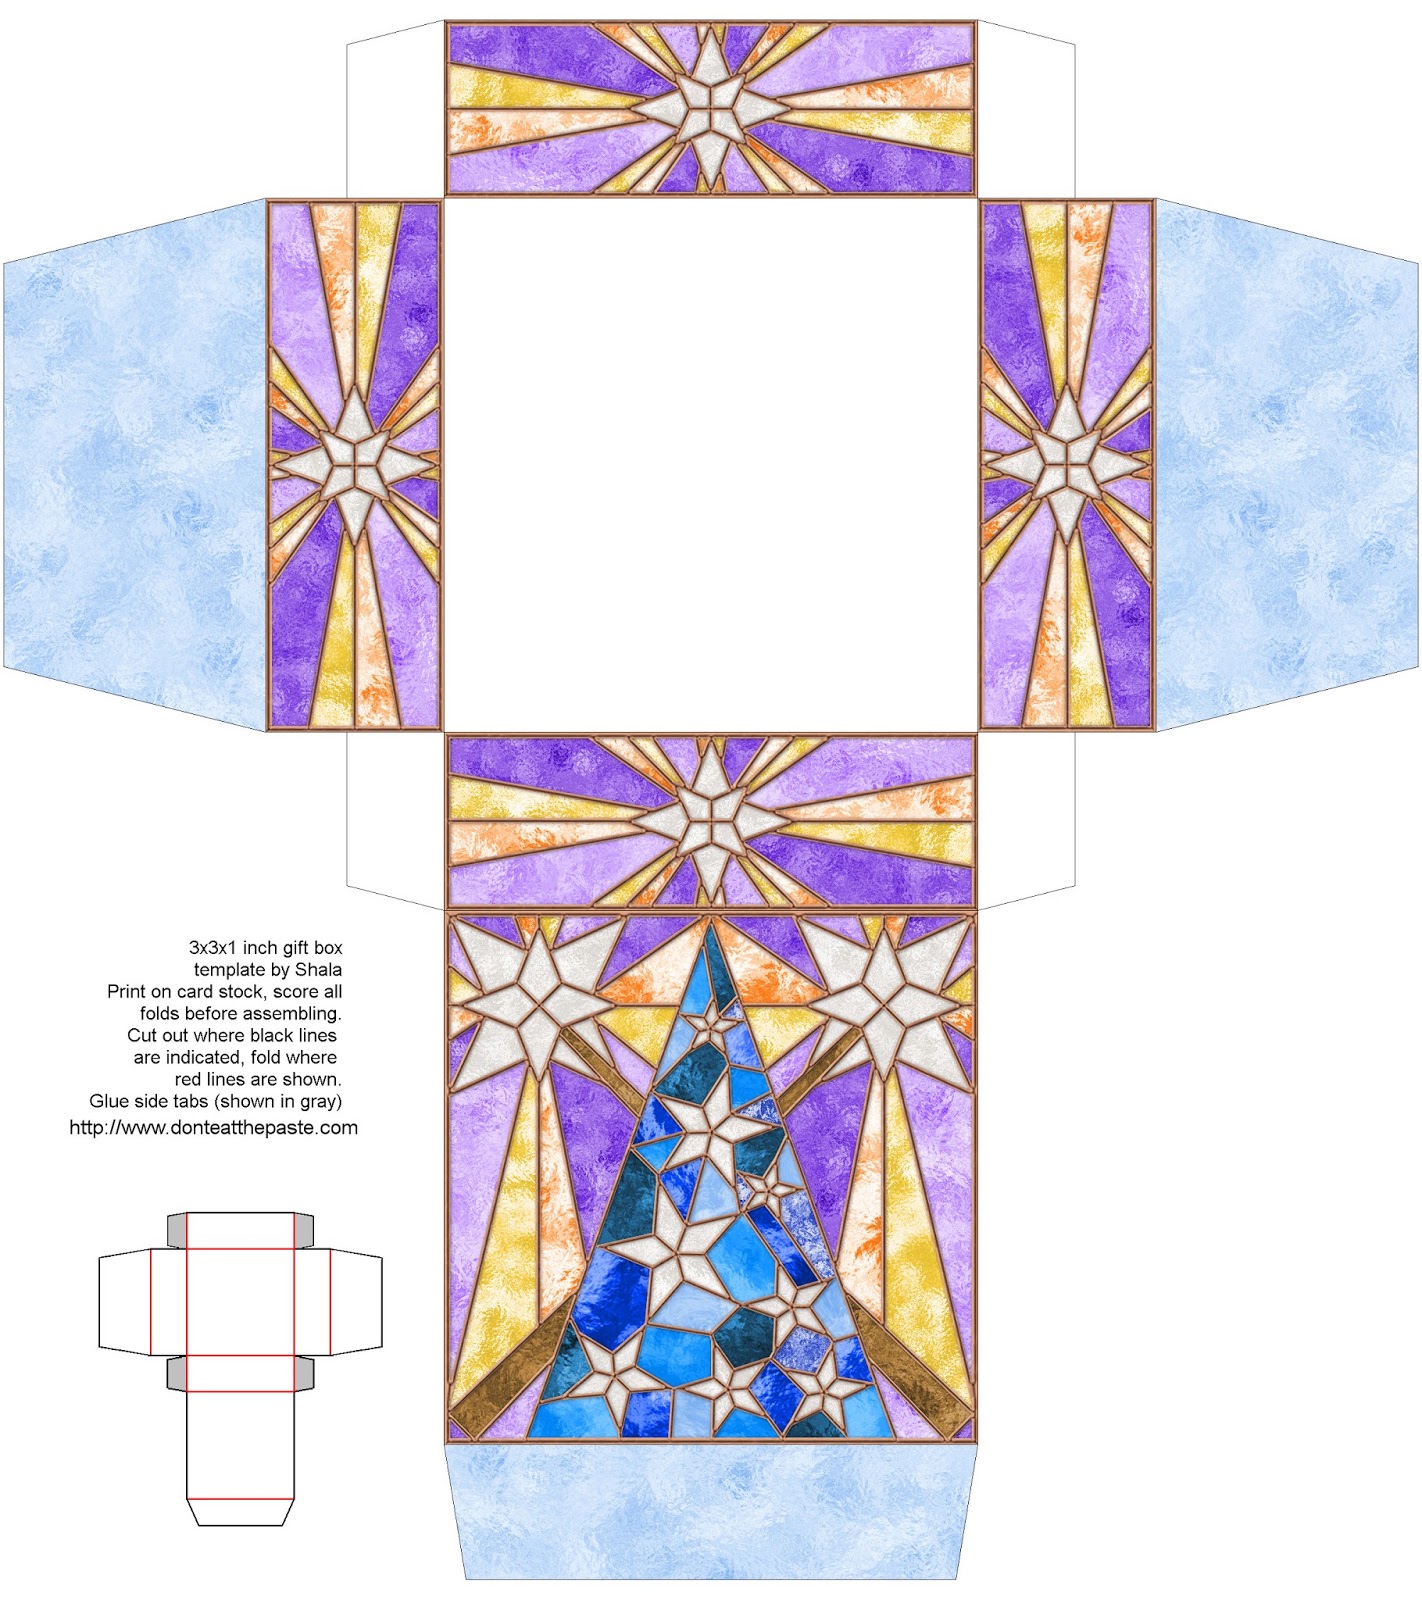 Printable stained glass effect gift box